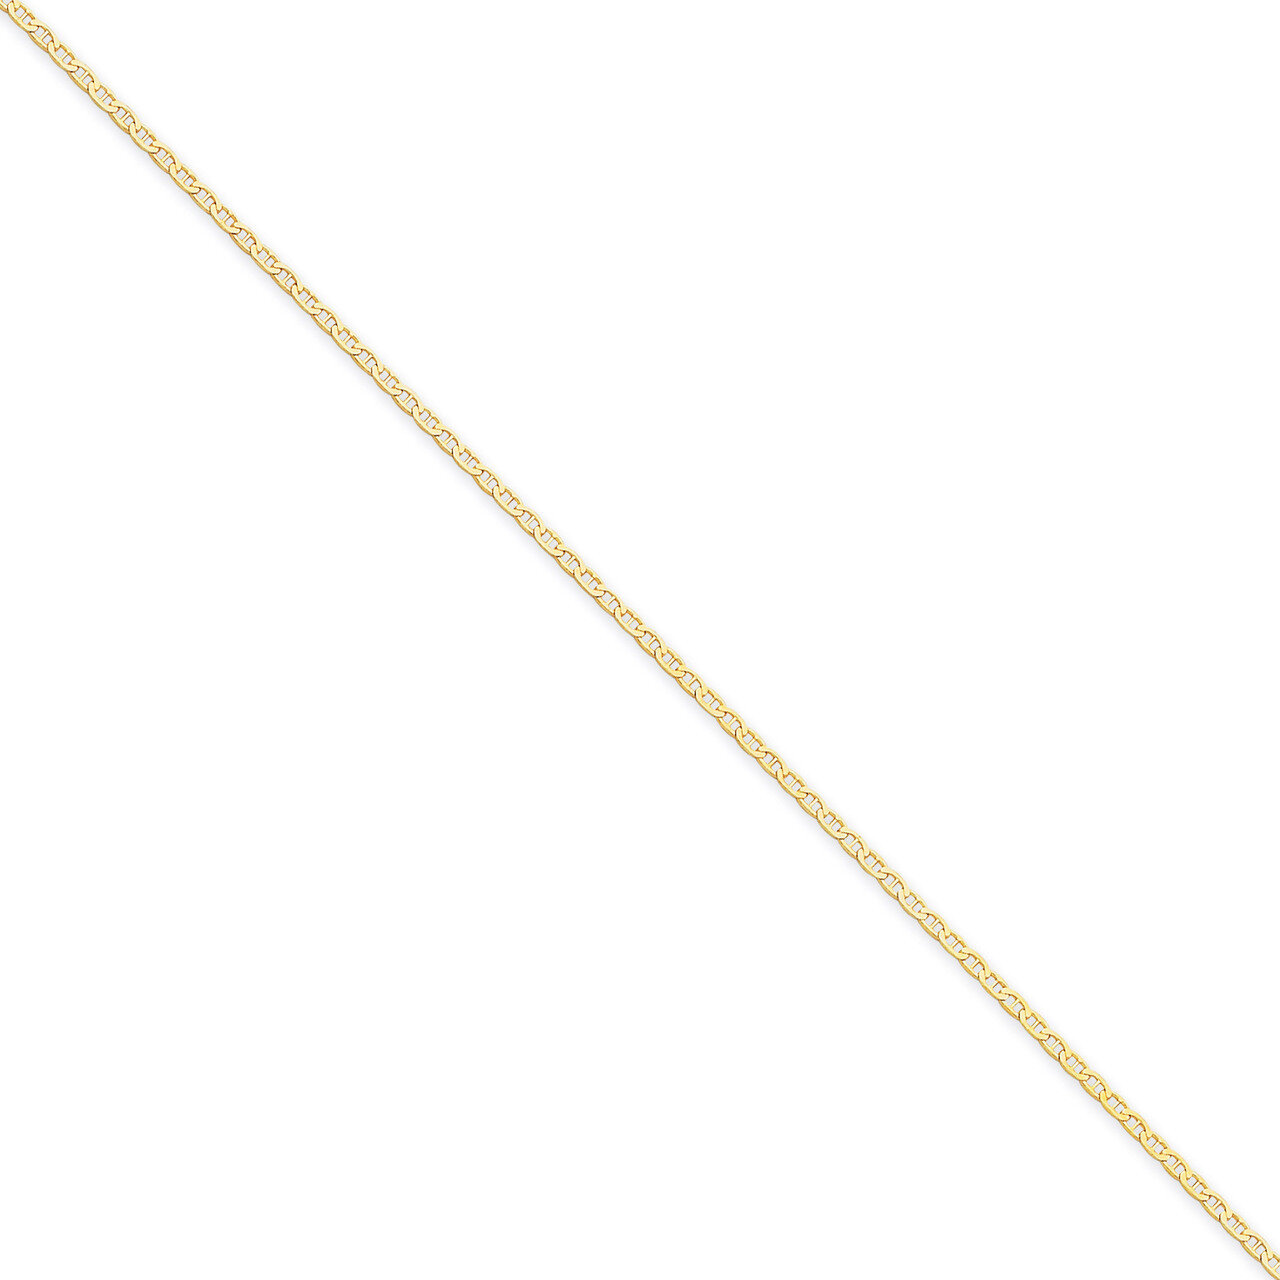 1.5mm Anchor Link Chain 9 Inch 14k Gold PEN50-9